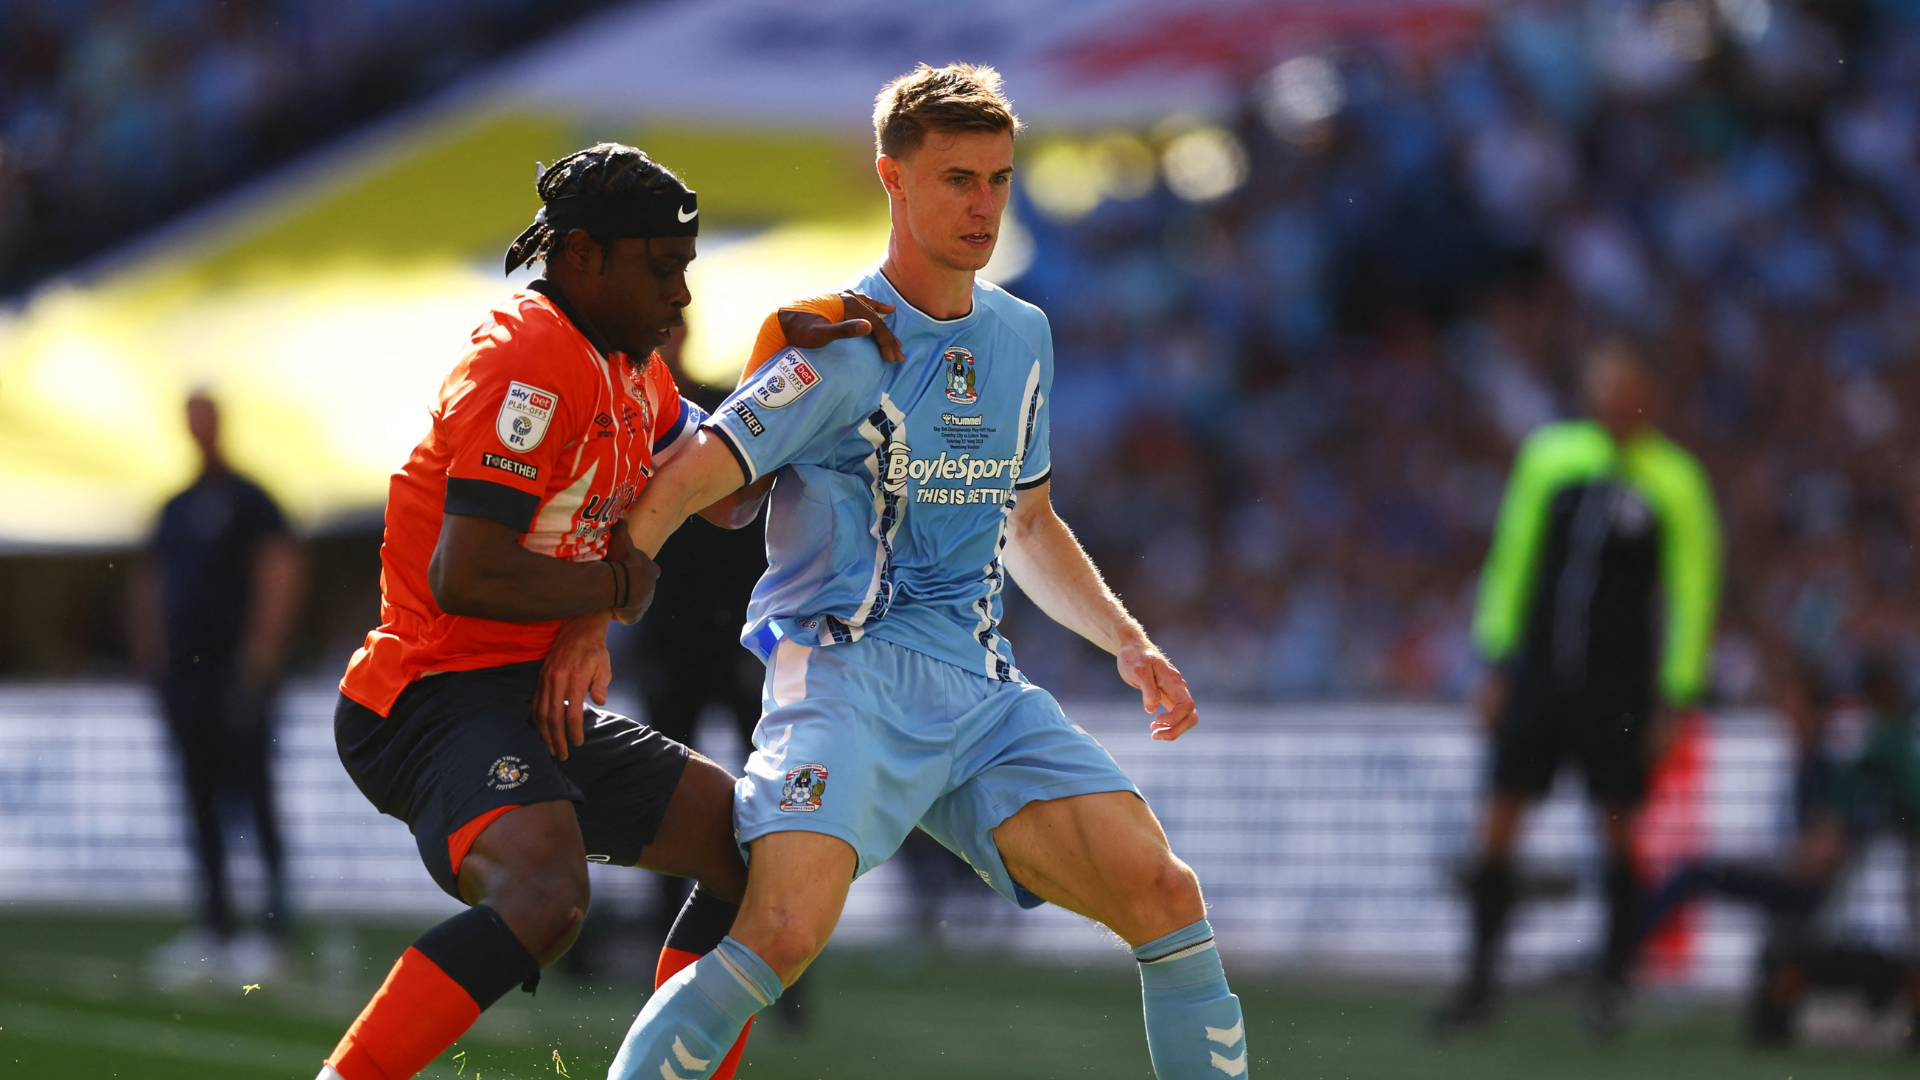 Coventry City must take £15m stance on Ben Sheaf amid Ipswich interest